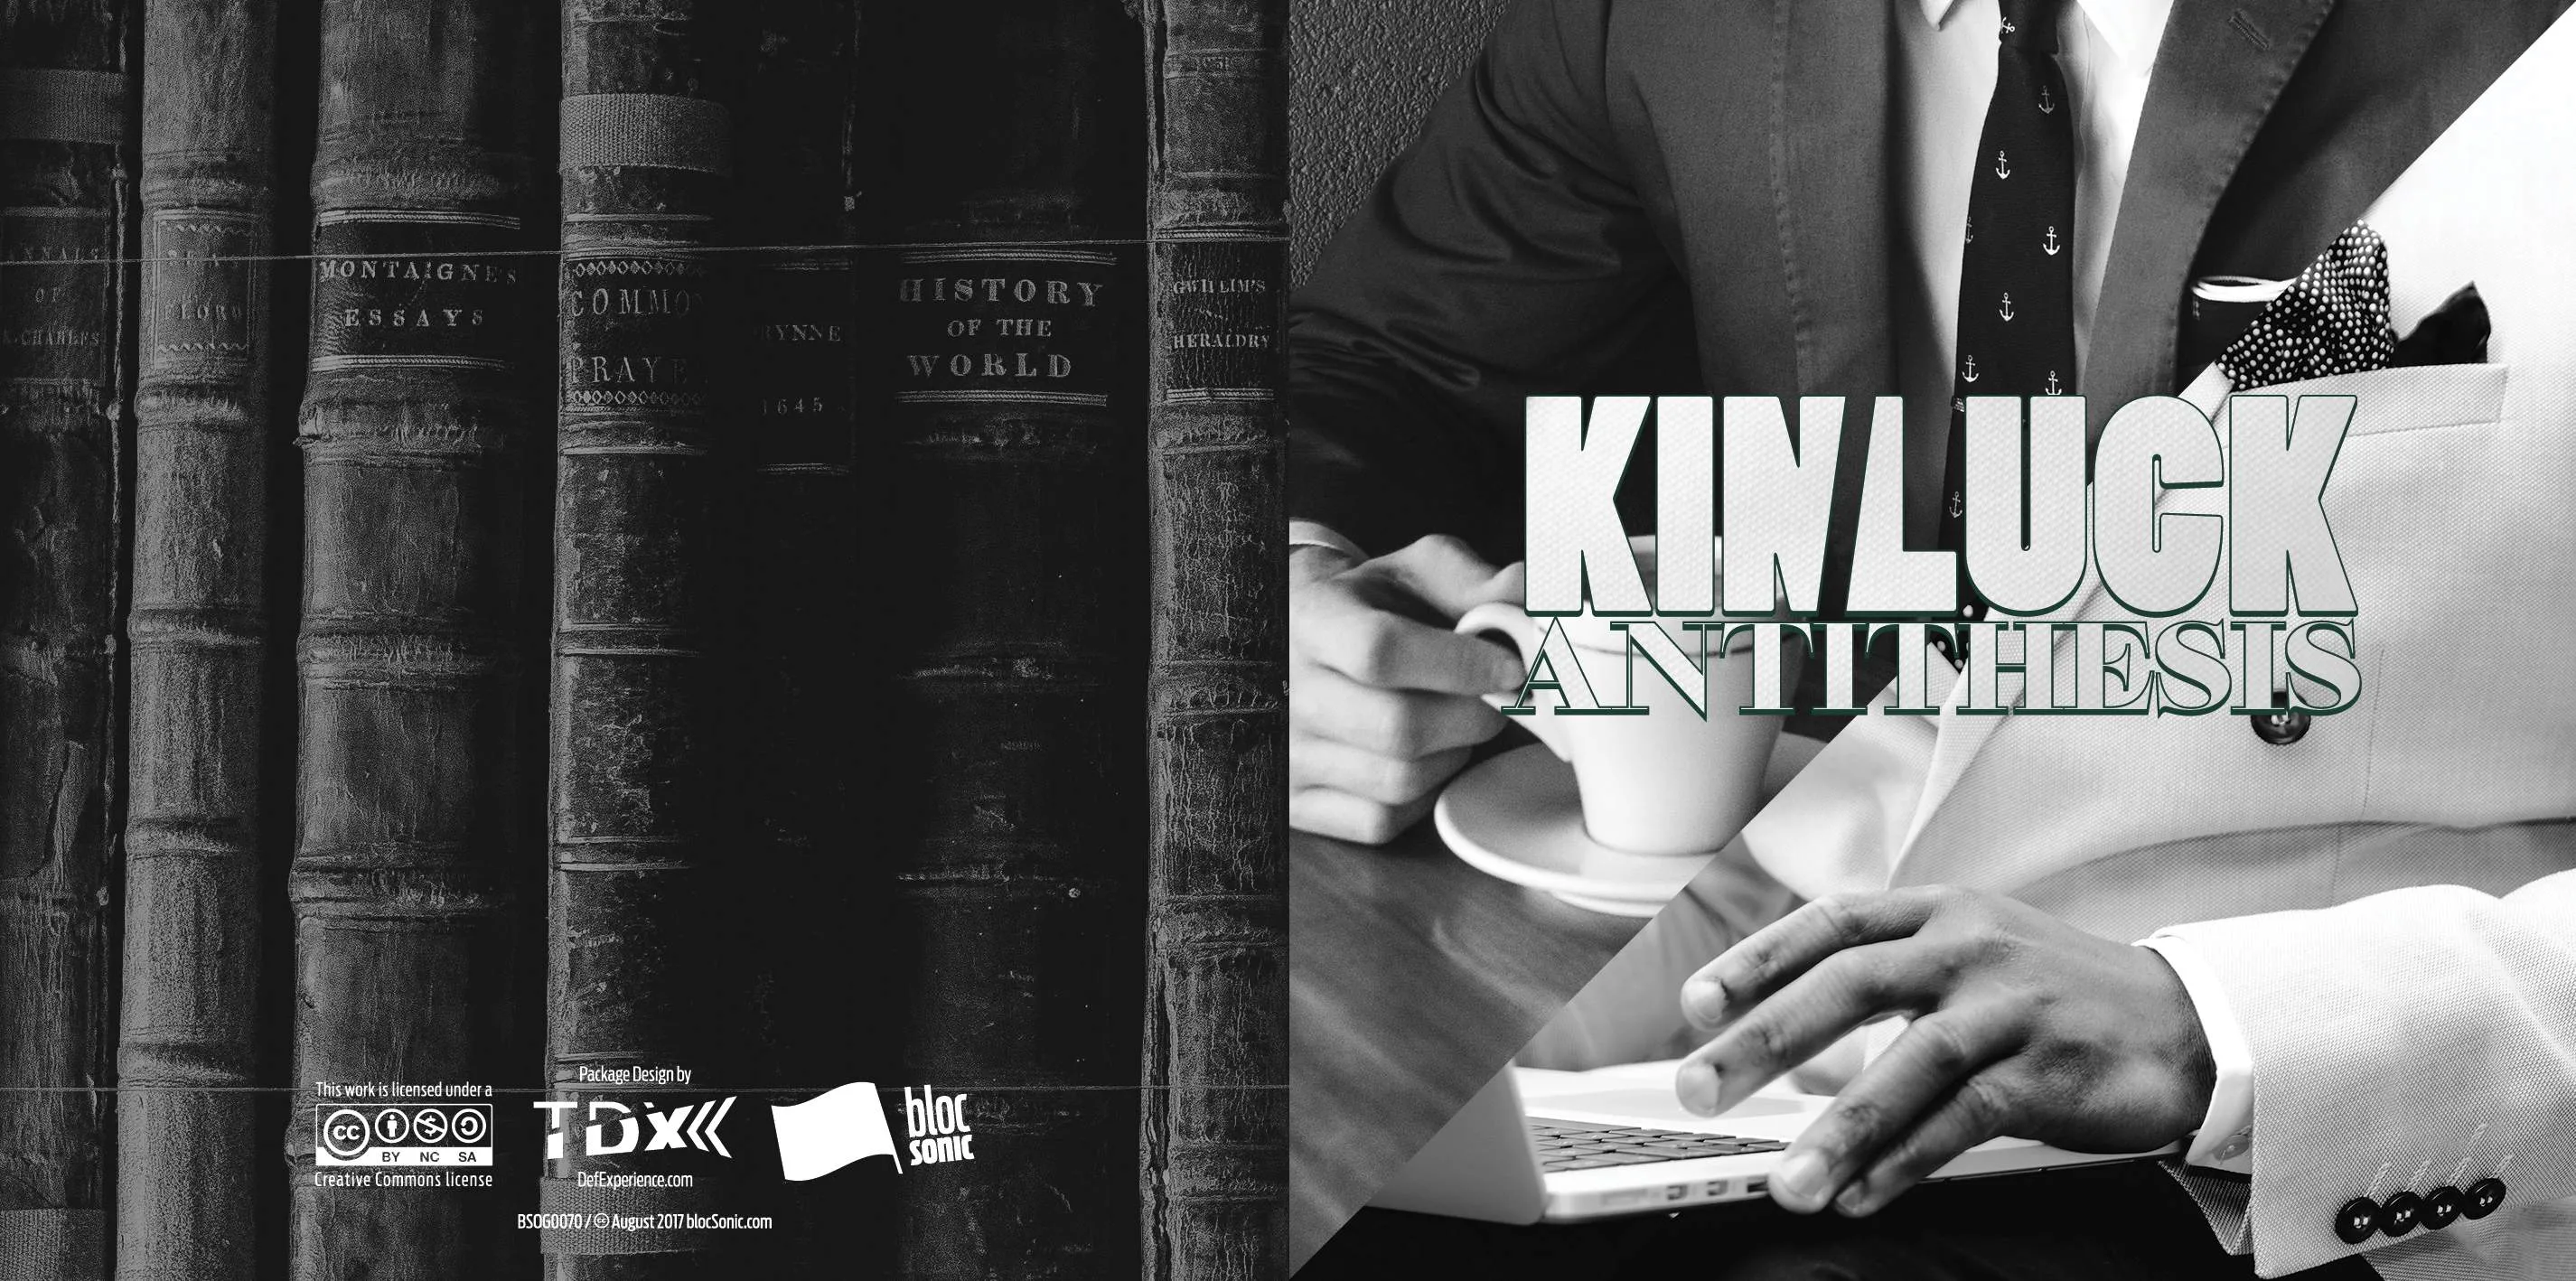 Album insert for “Antithesis” by KIN/LUCK